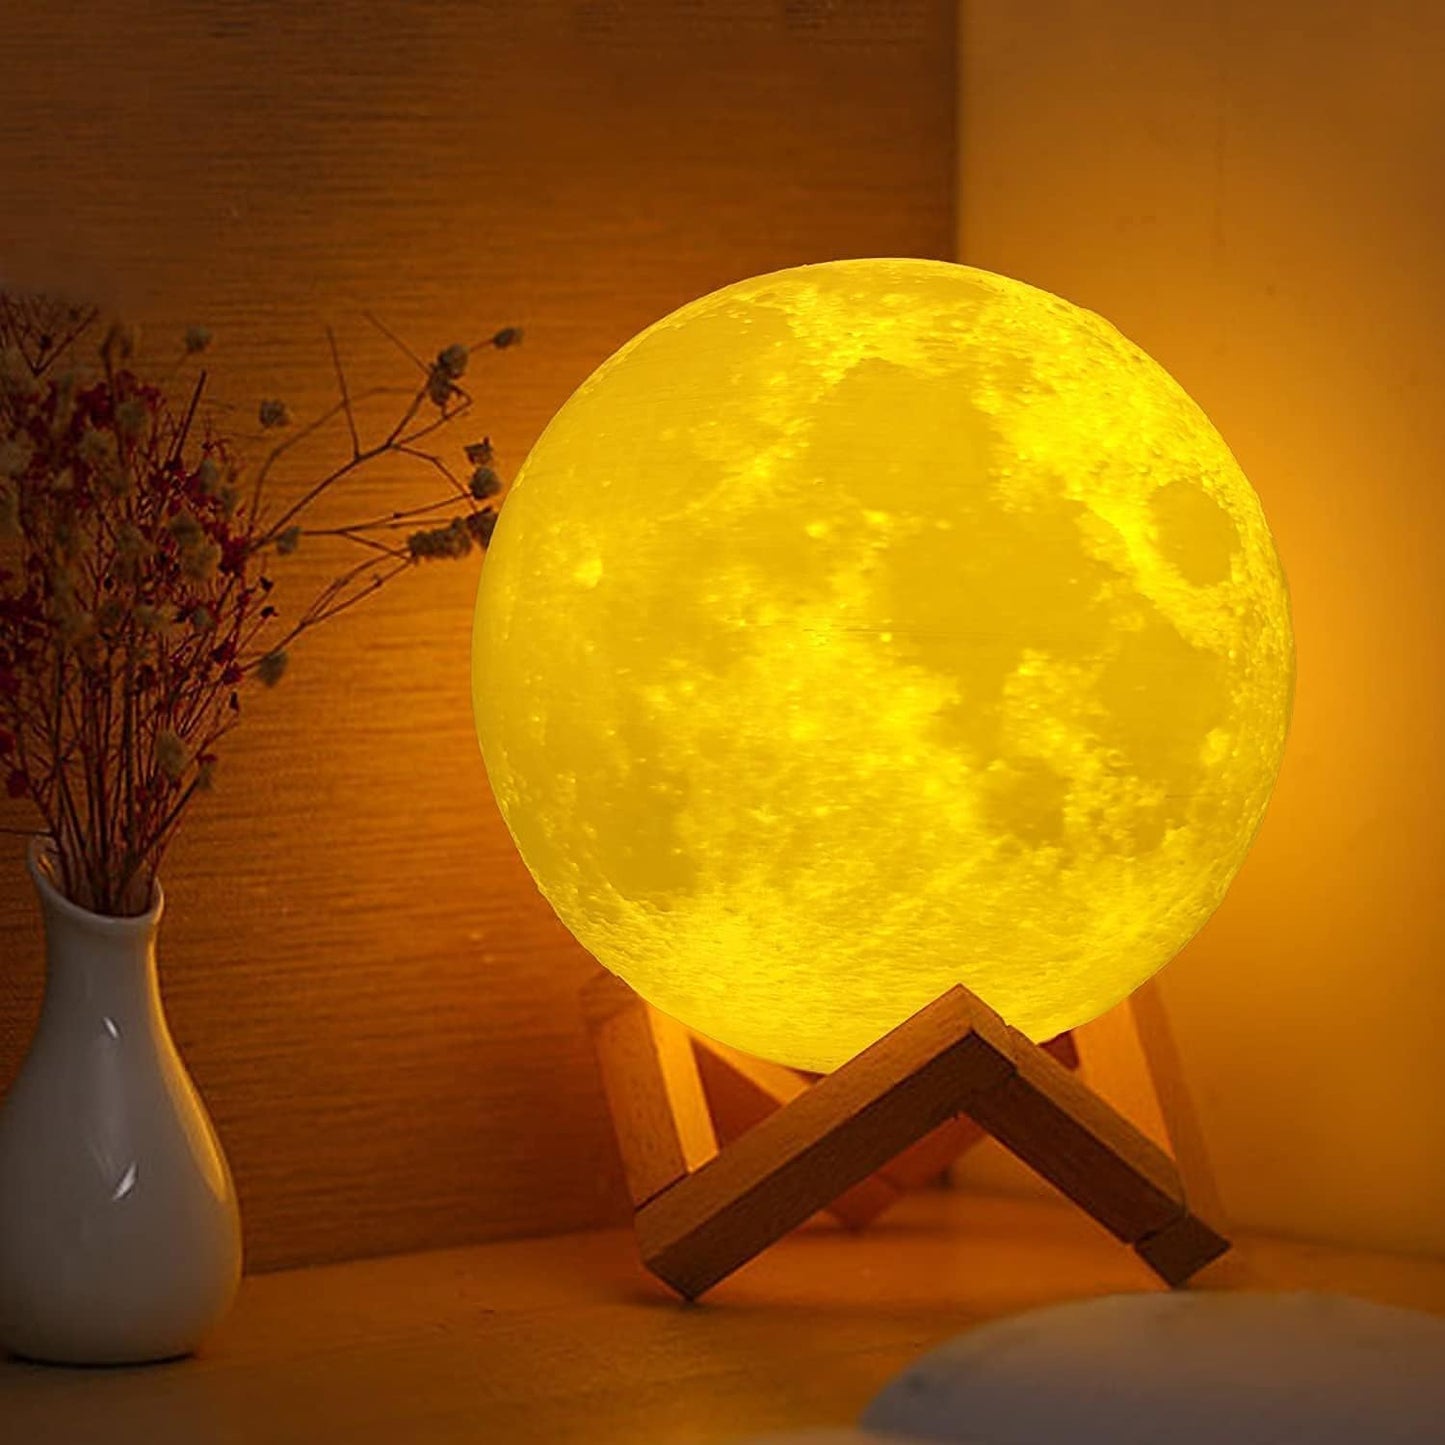 DiyaNLights 3D Moon Lamp 7 Colour Changeable Sensor Moon Night Light,Touch Control,Moonlight Lamp with Stand&USB for Bedrooms Valentine Gifts,Festival Gifts,New Year Gifts,Wedding Gifts(18 Cm)